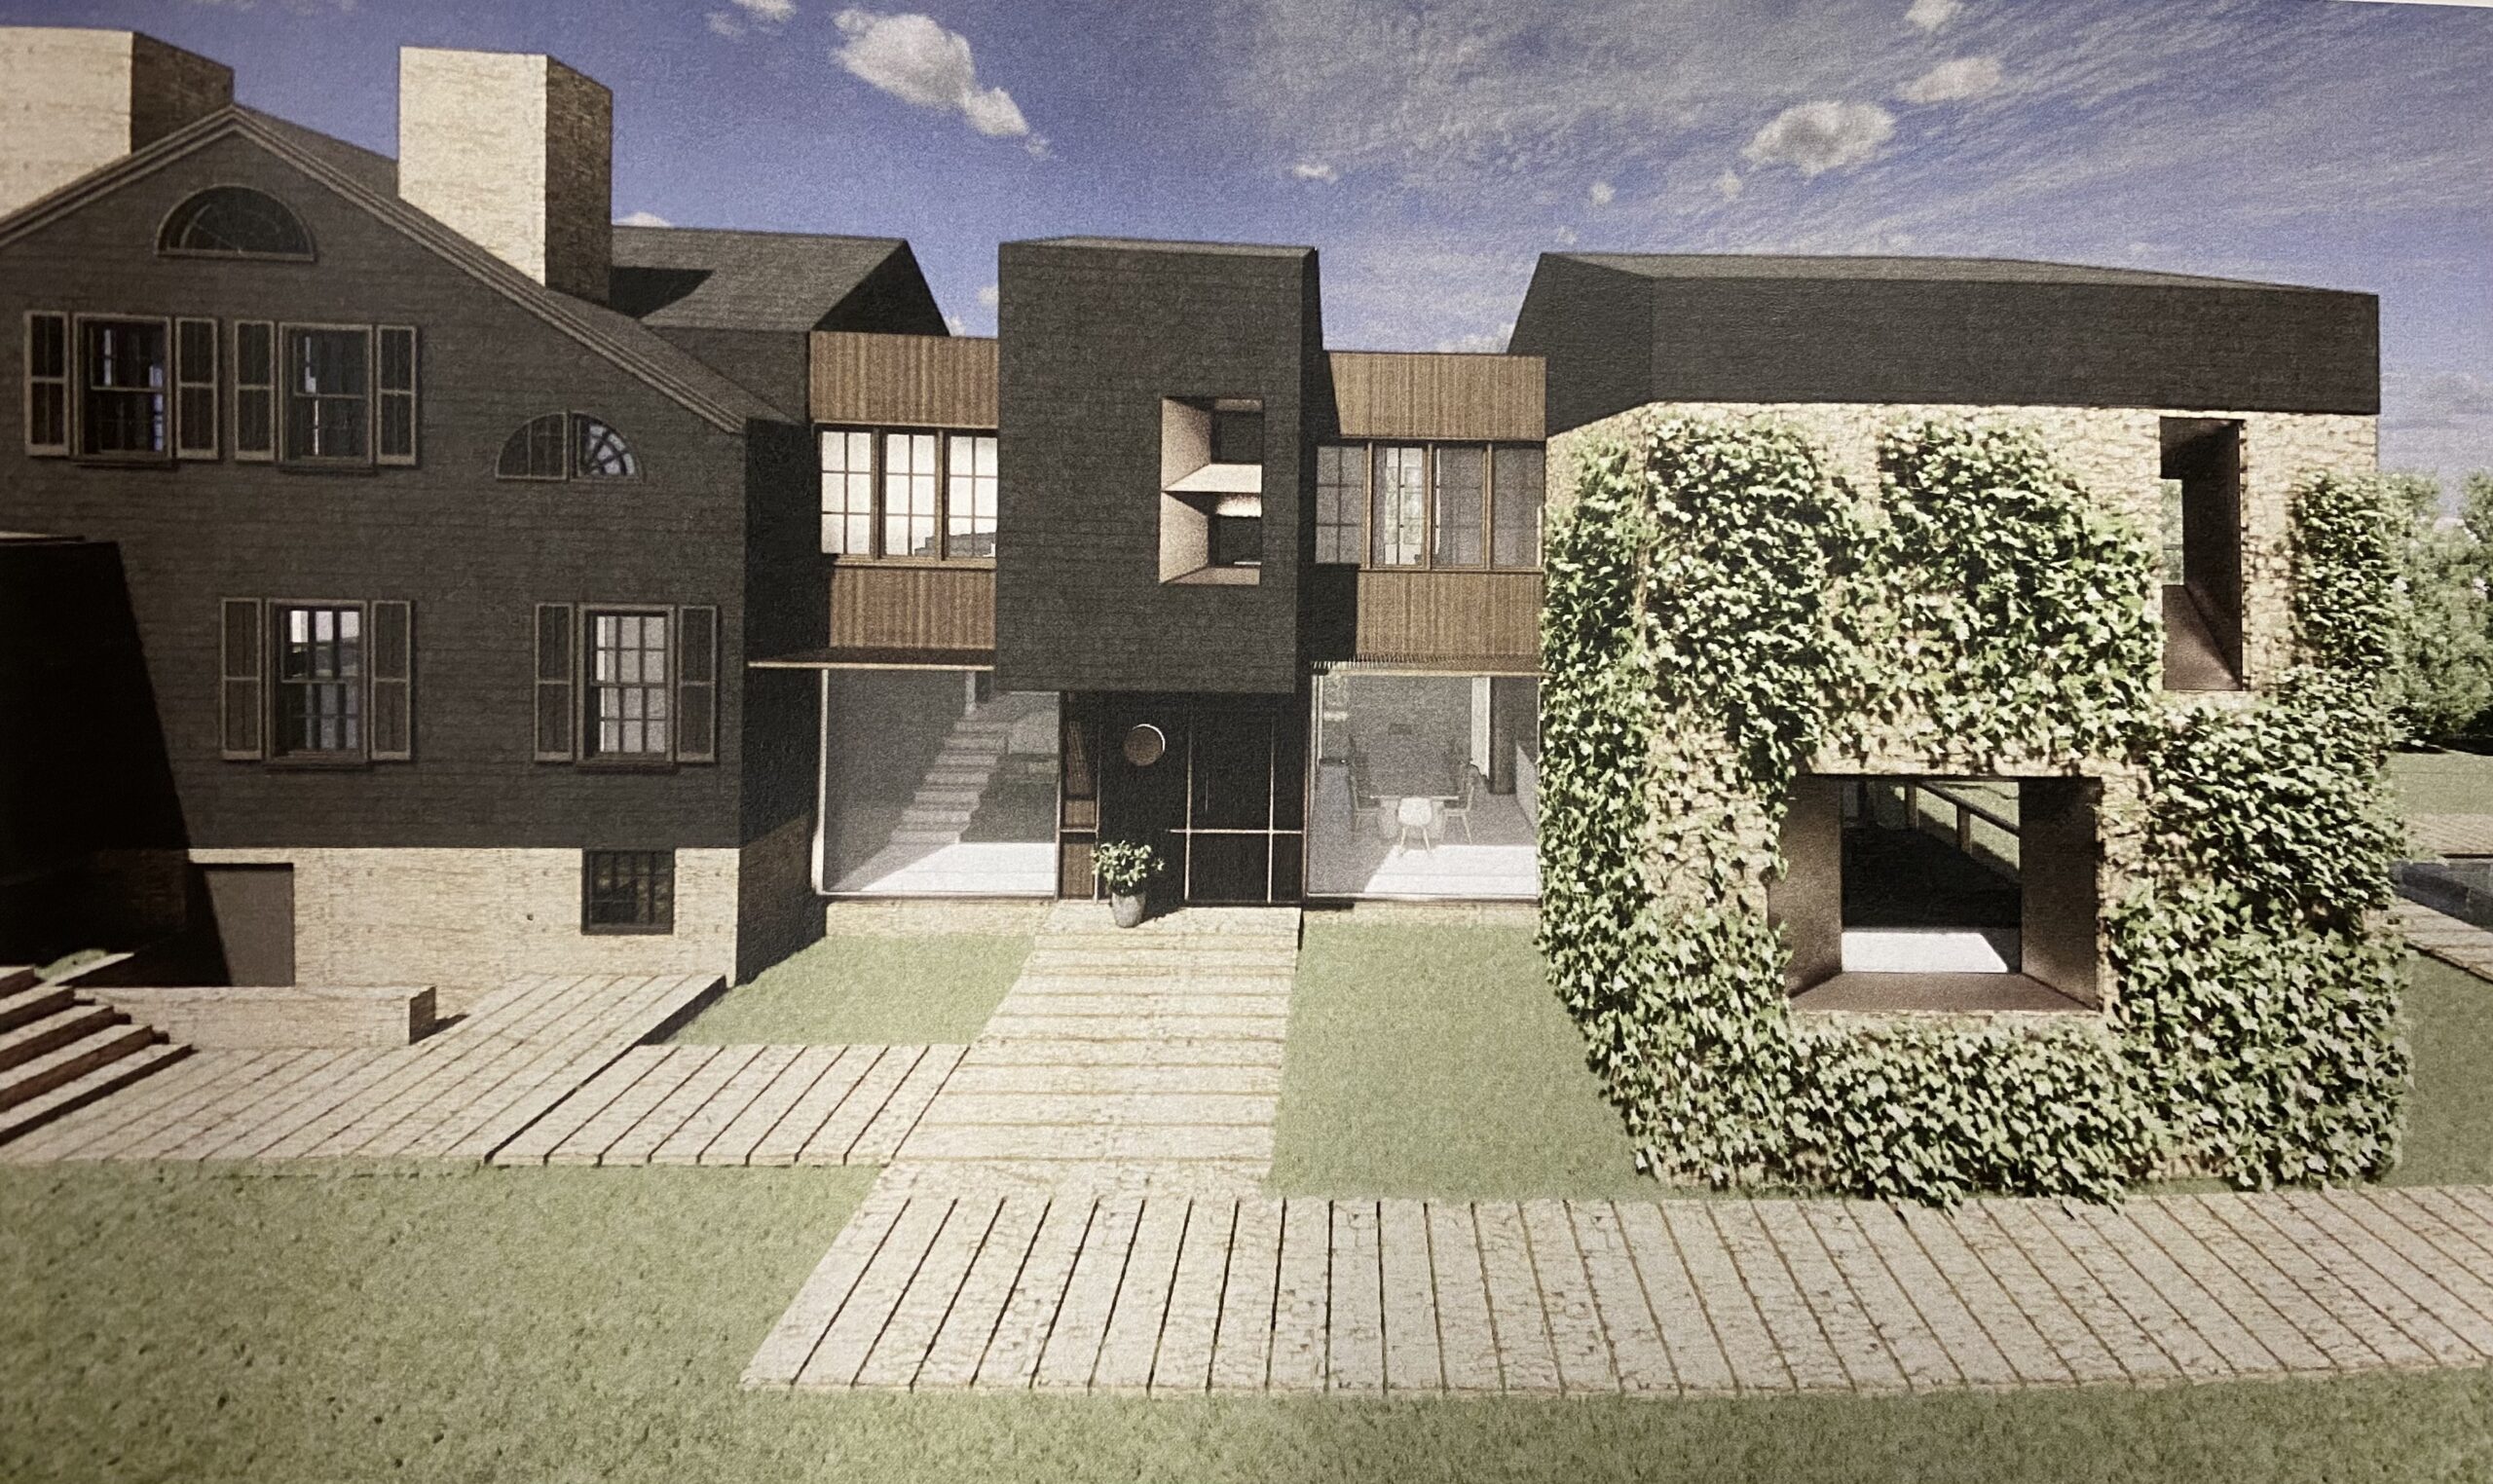 Rendering of the addition with granite wall (at right, with ivy on it) proposed for 207 Madison Street in Sag Harbor (original house at left).